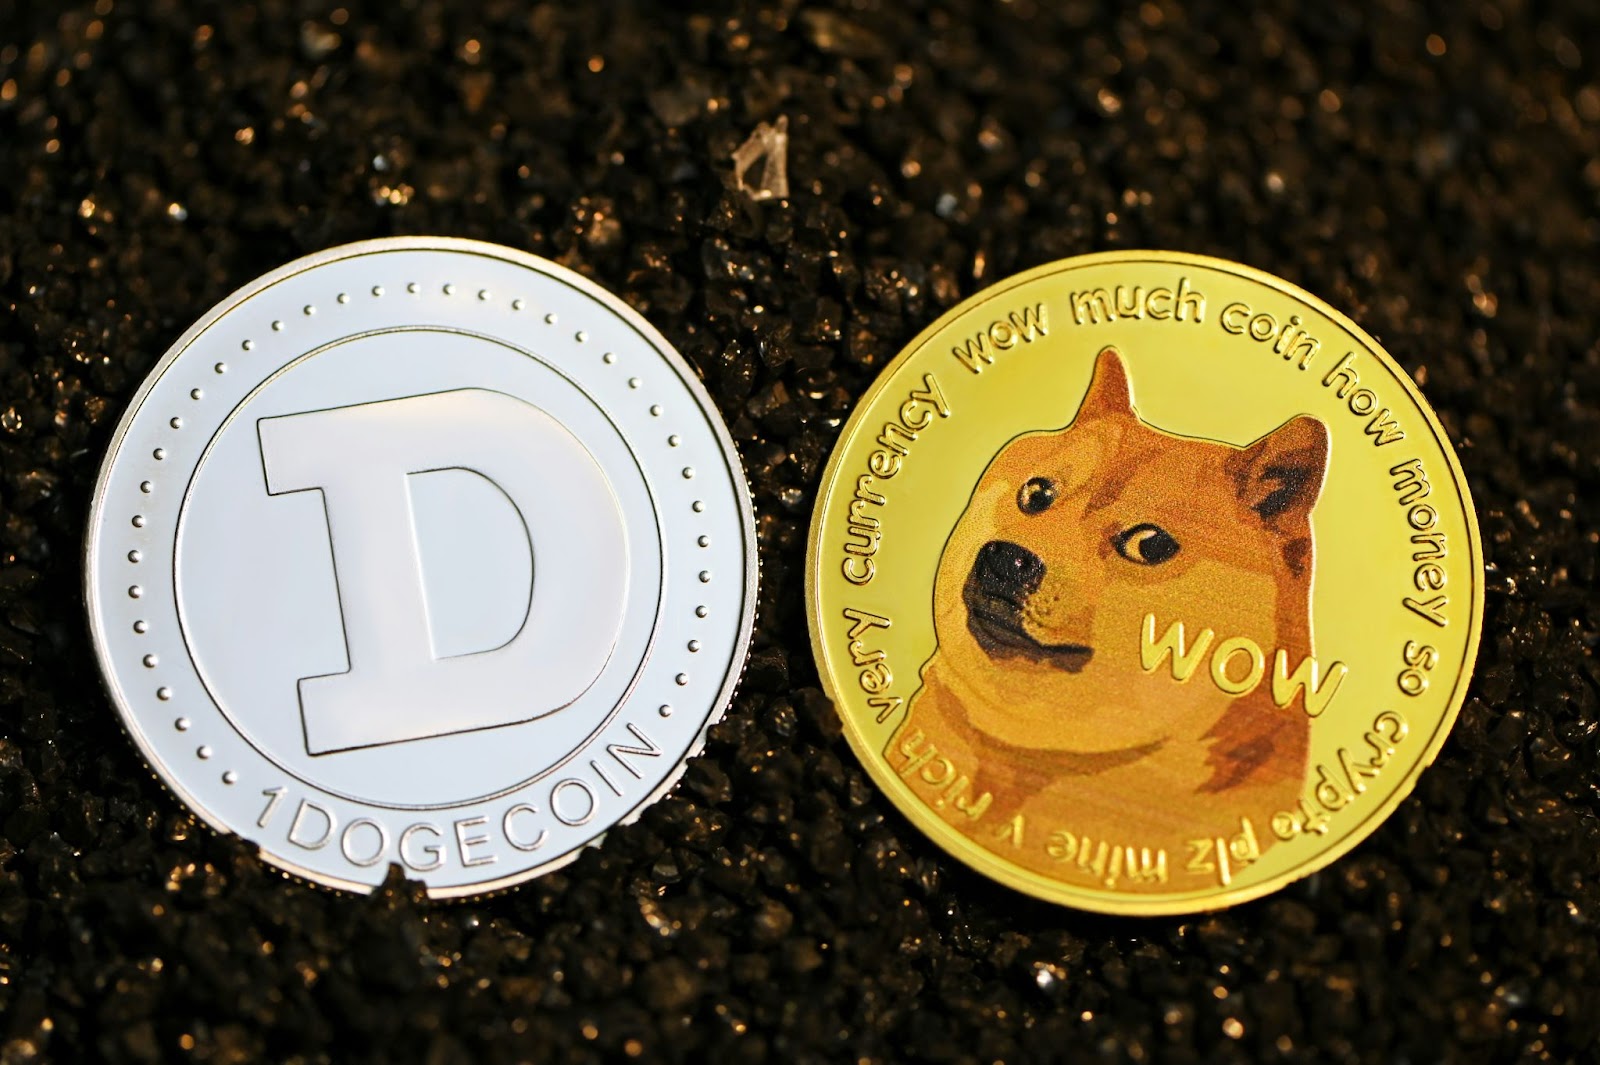 Dogecoin20: High Stakes with High Returns